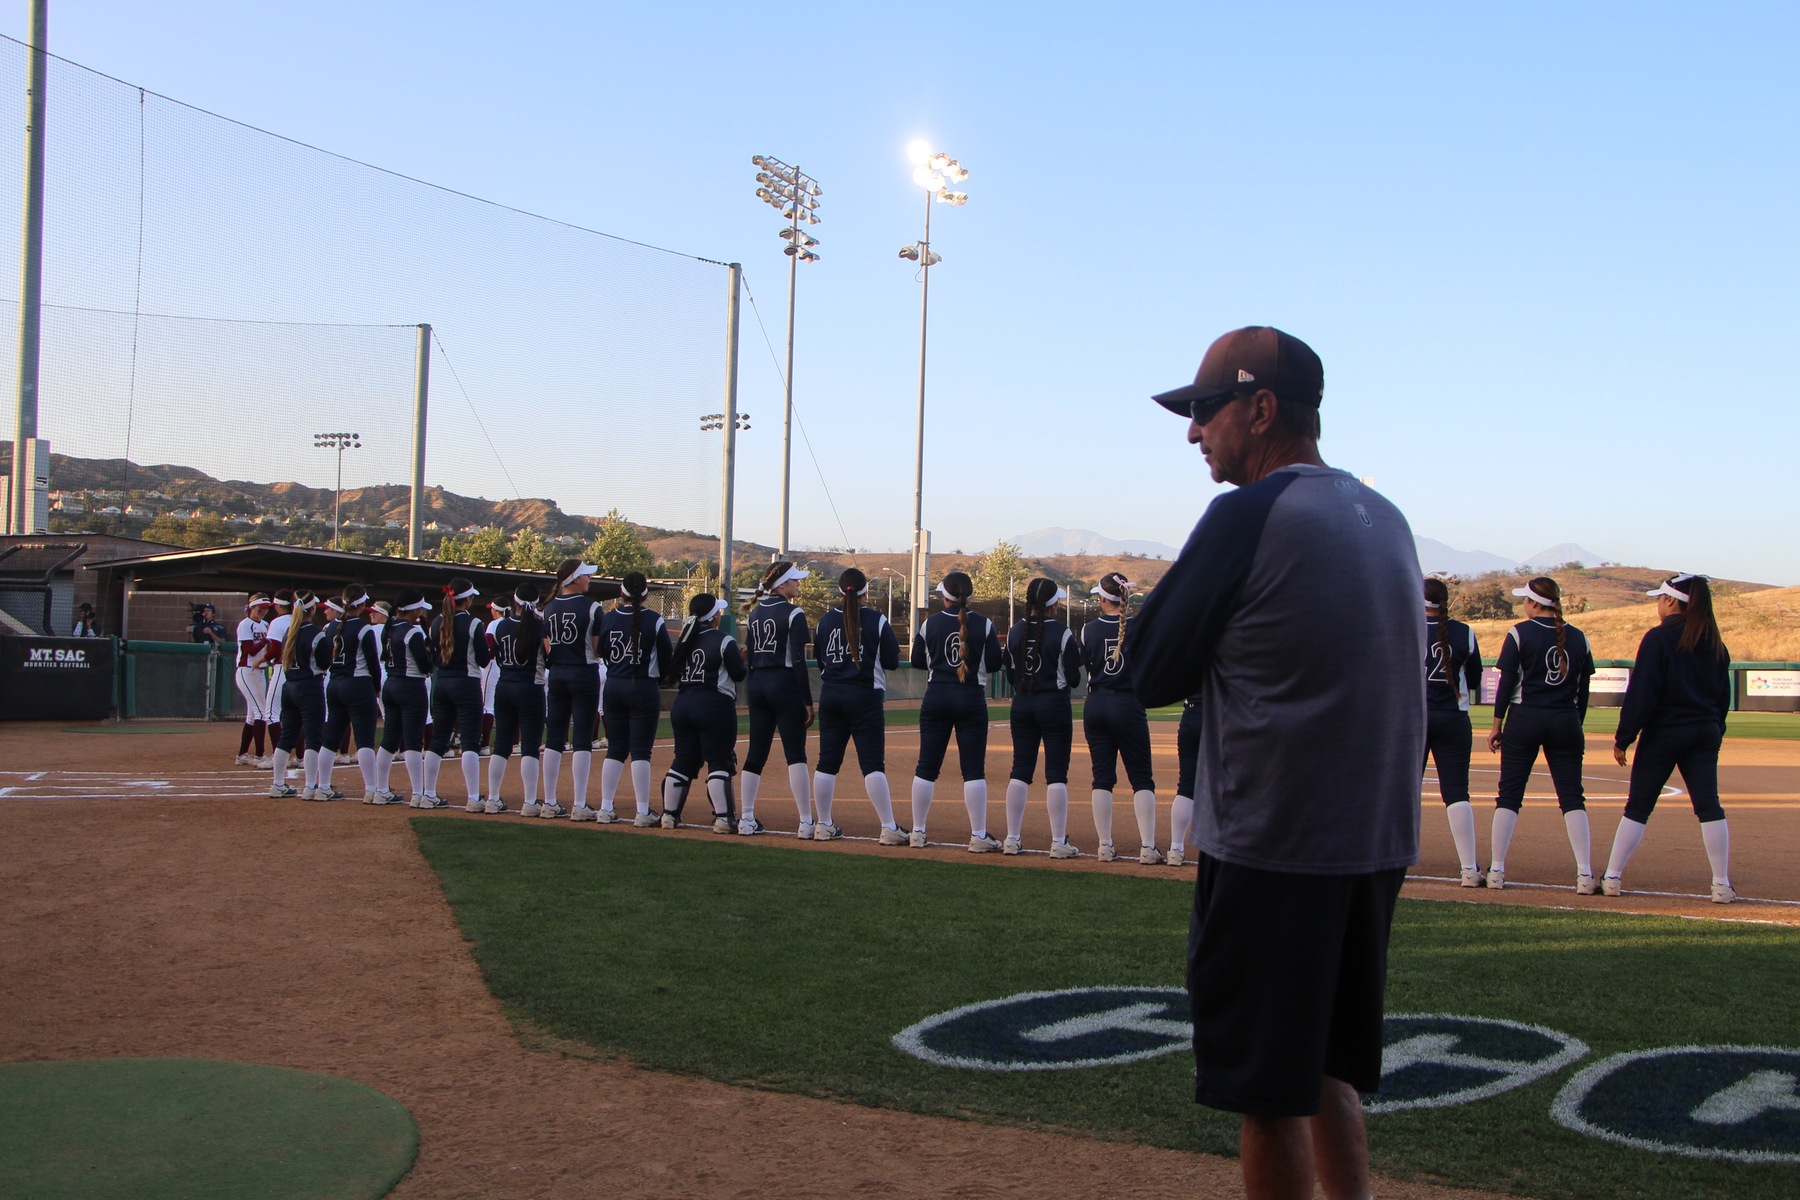 NFCA Announces Brad Pickler as 2019 Hall of Fame Honoree